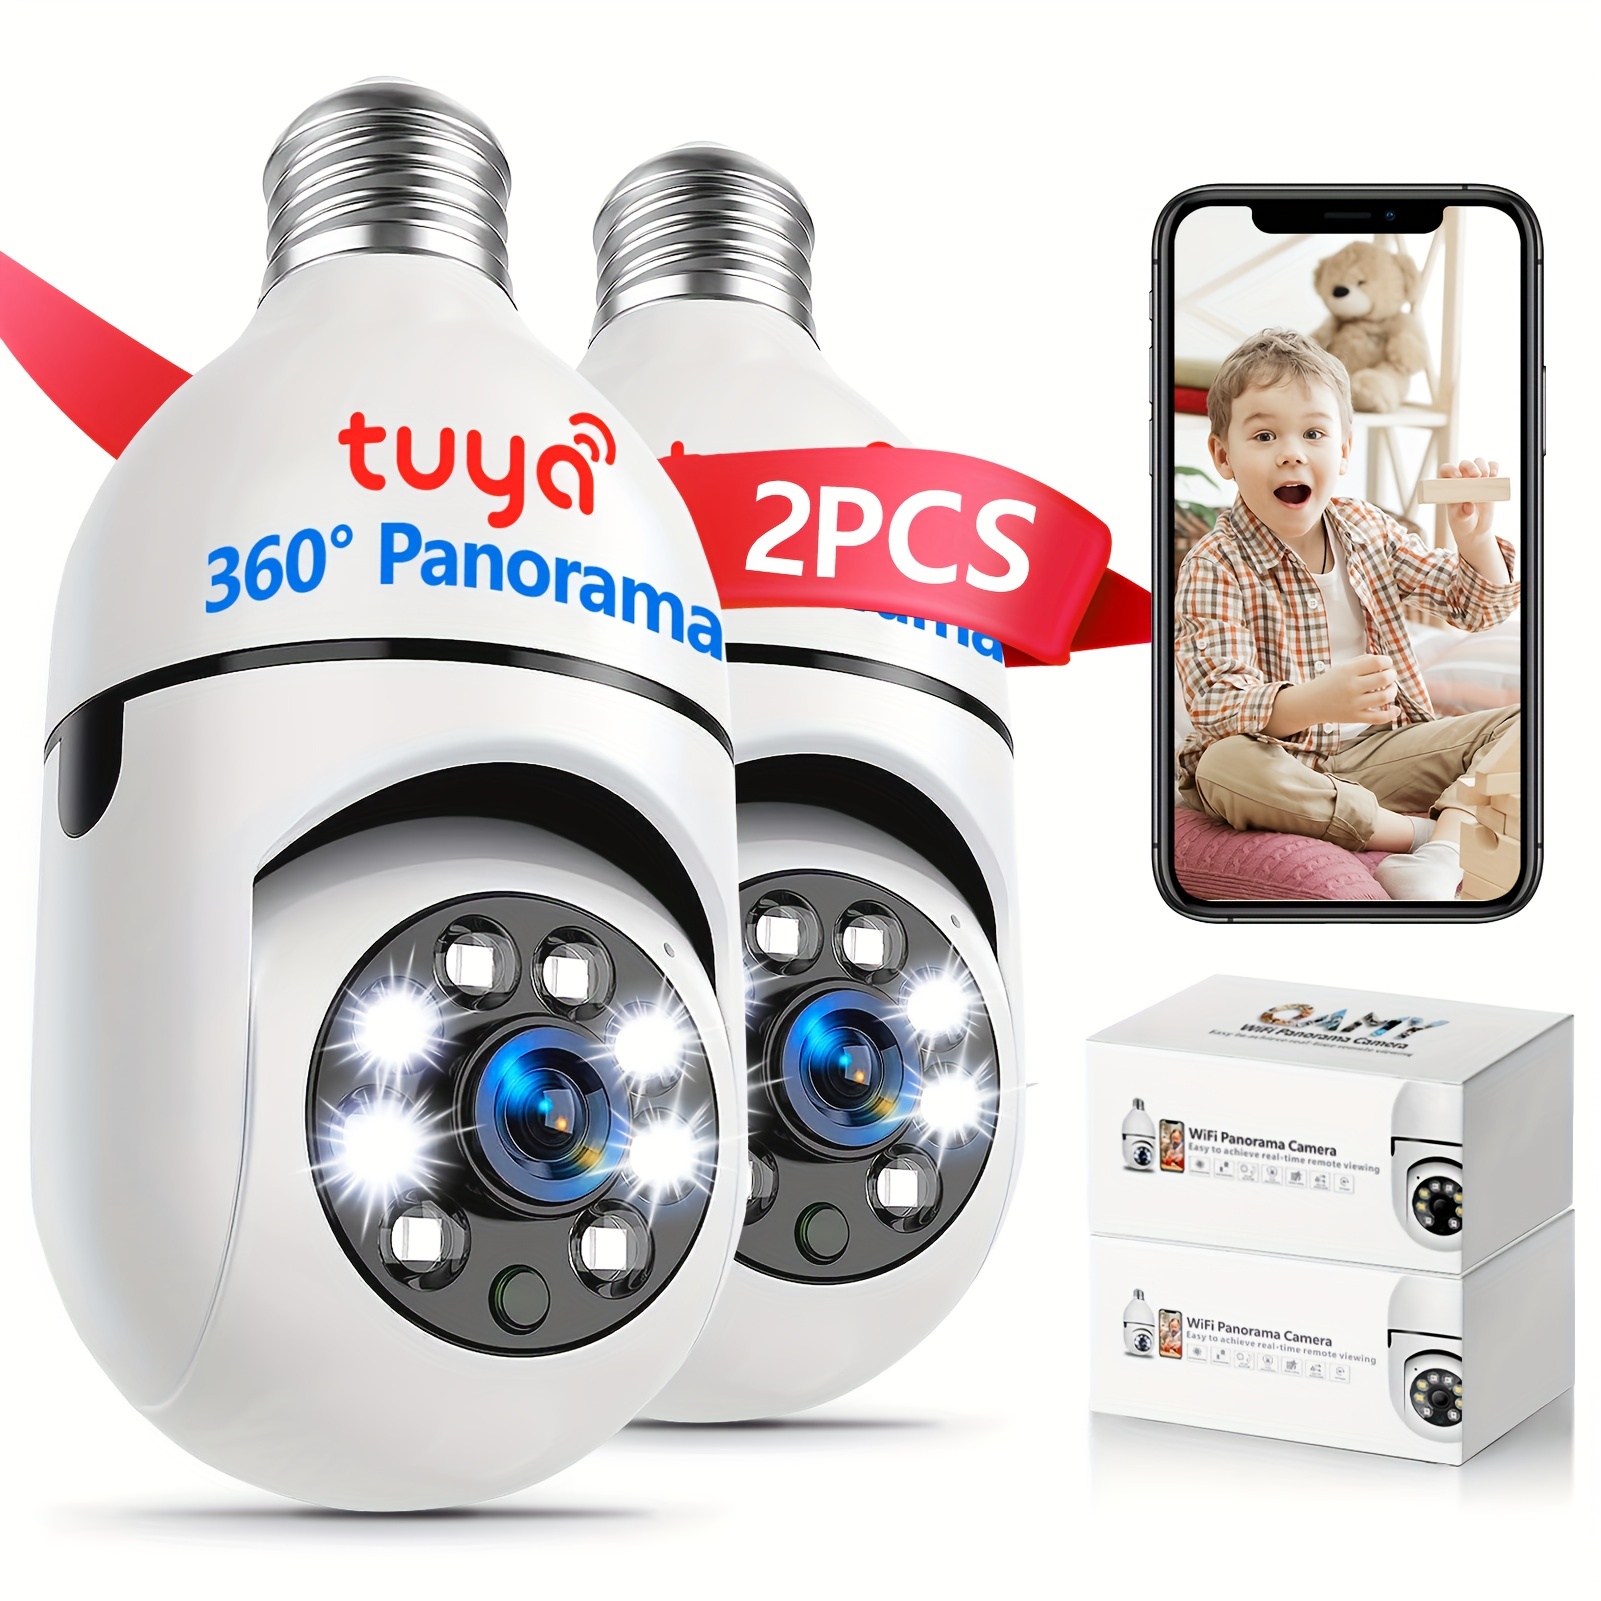 

2pcs Light Bulb Security Camera, With 360° Panoramic View And Hd Full-colour Night Vision, Connecting To The App Via 2.4g Wifi For Motion Alerts And Two-way Communication.